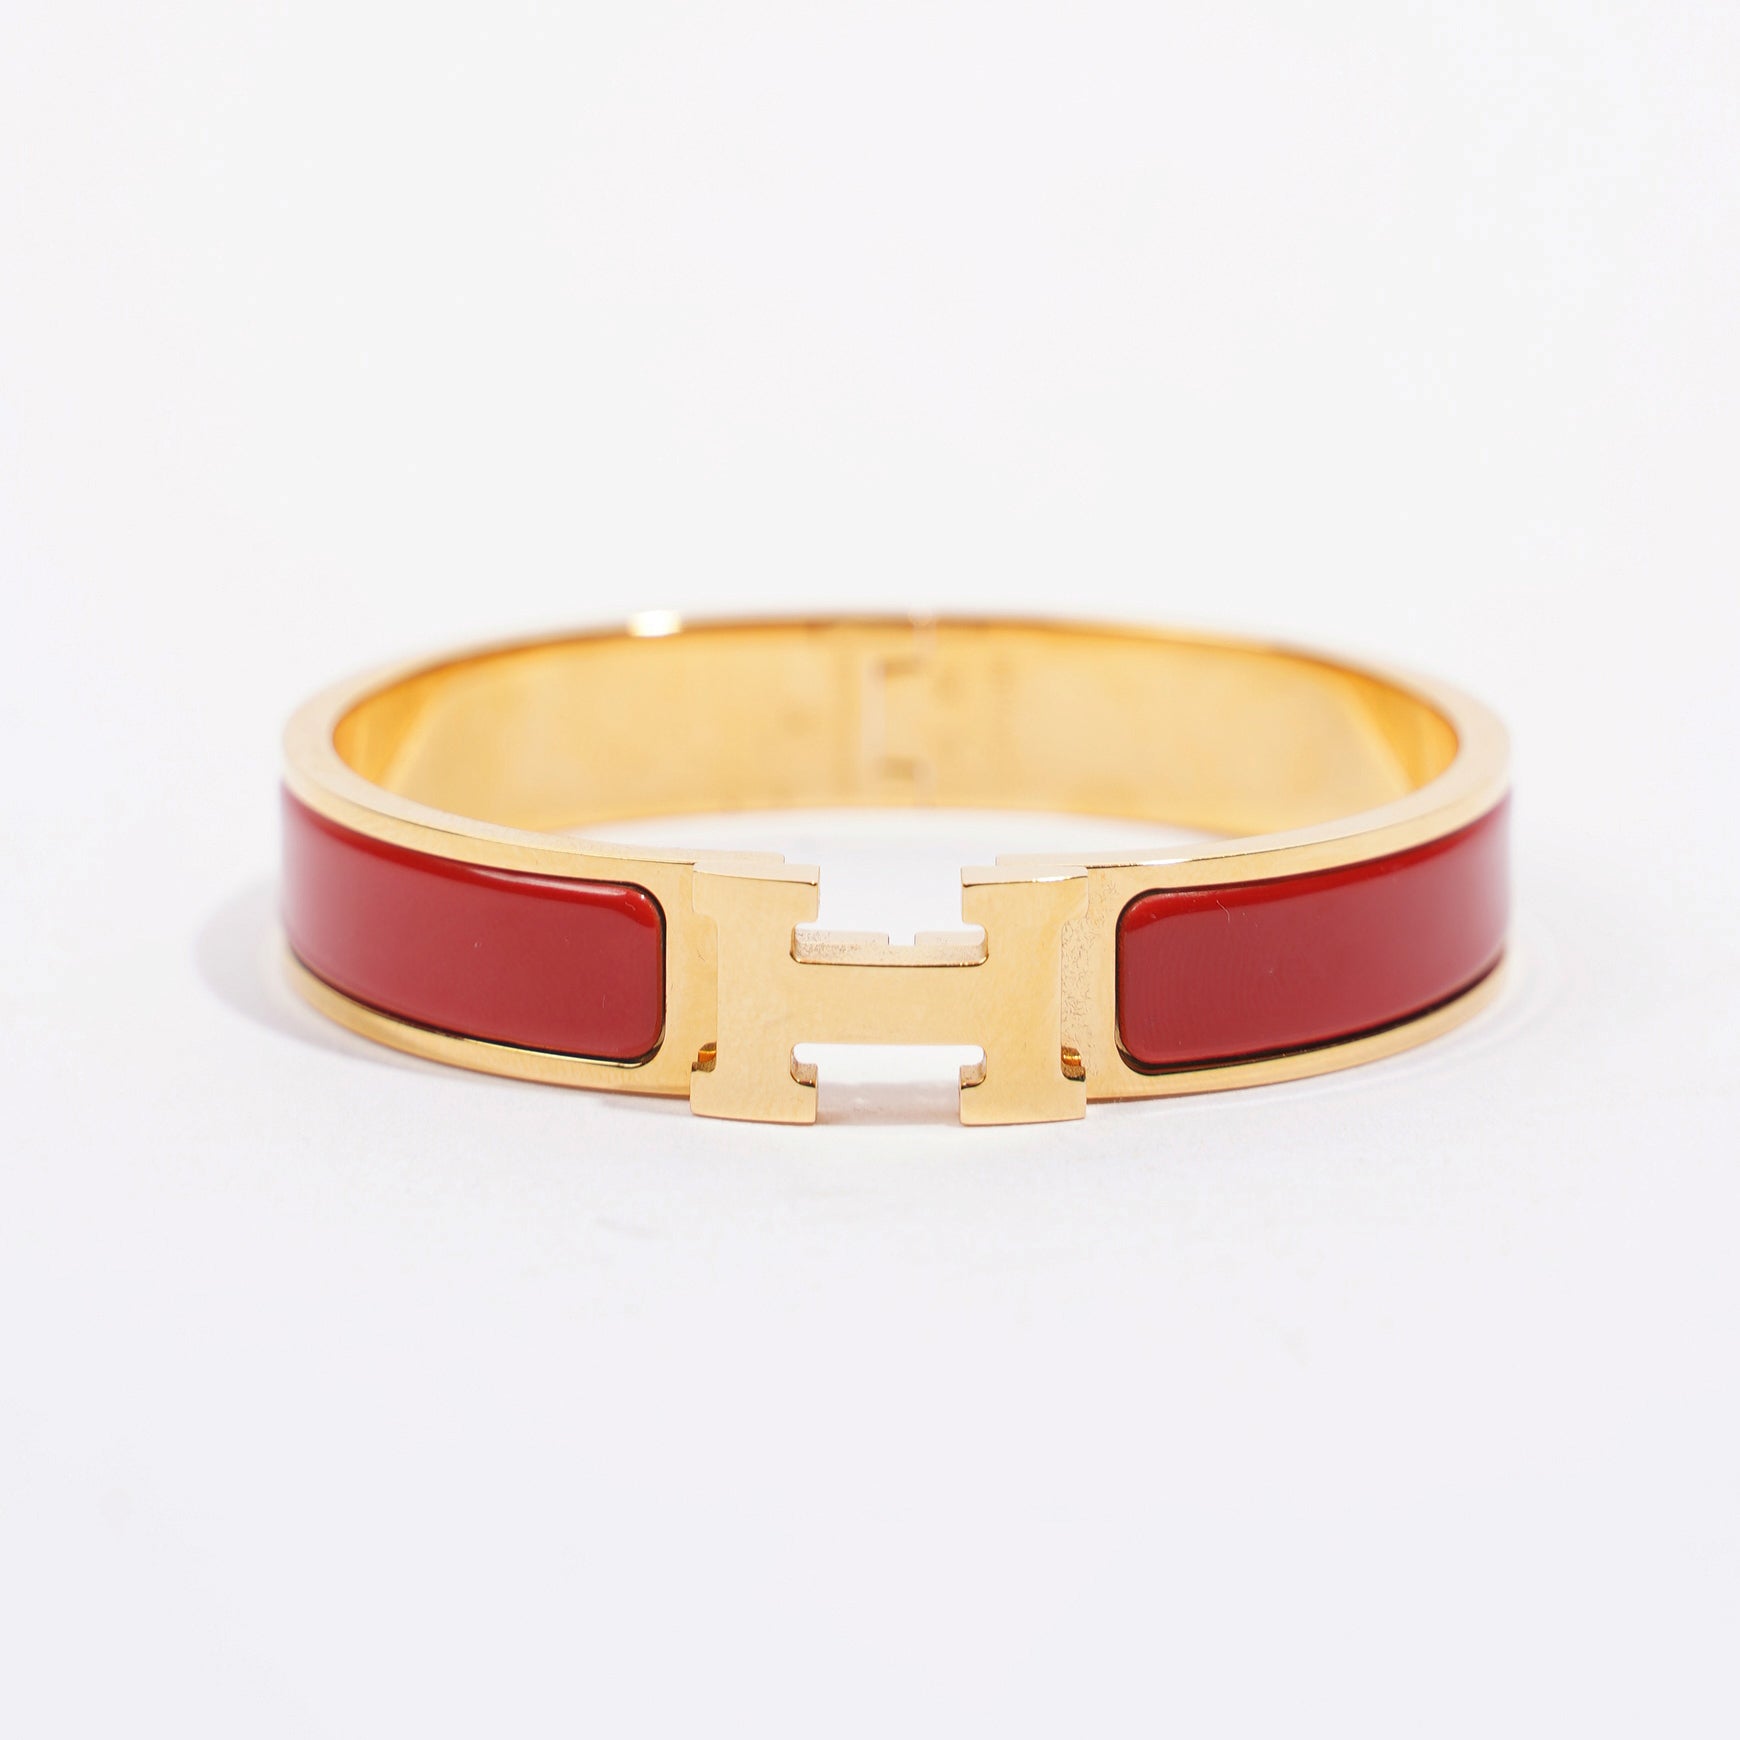 Hermes Narrow Clic H Bracelet (Sky Blue/Rose Gold Plated) - GM | Rent Hermes  jewelry for $55/month - Join Switch